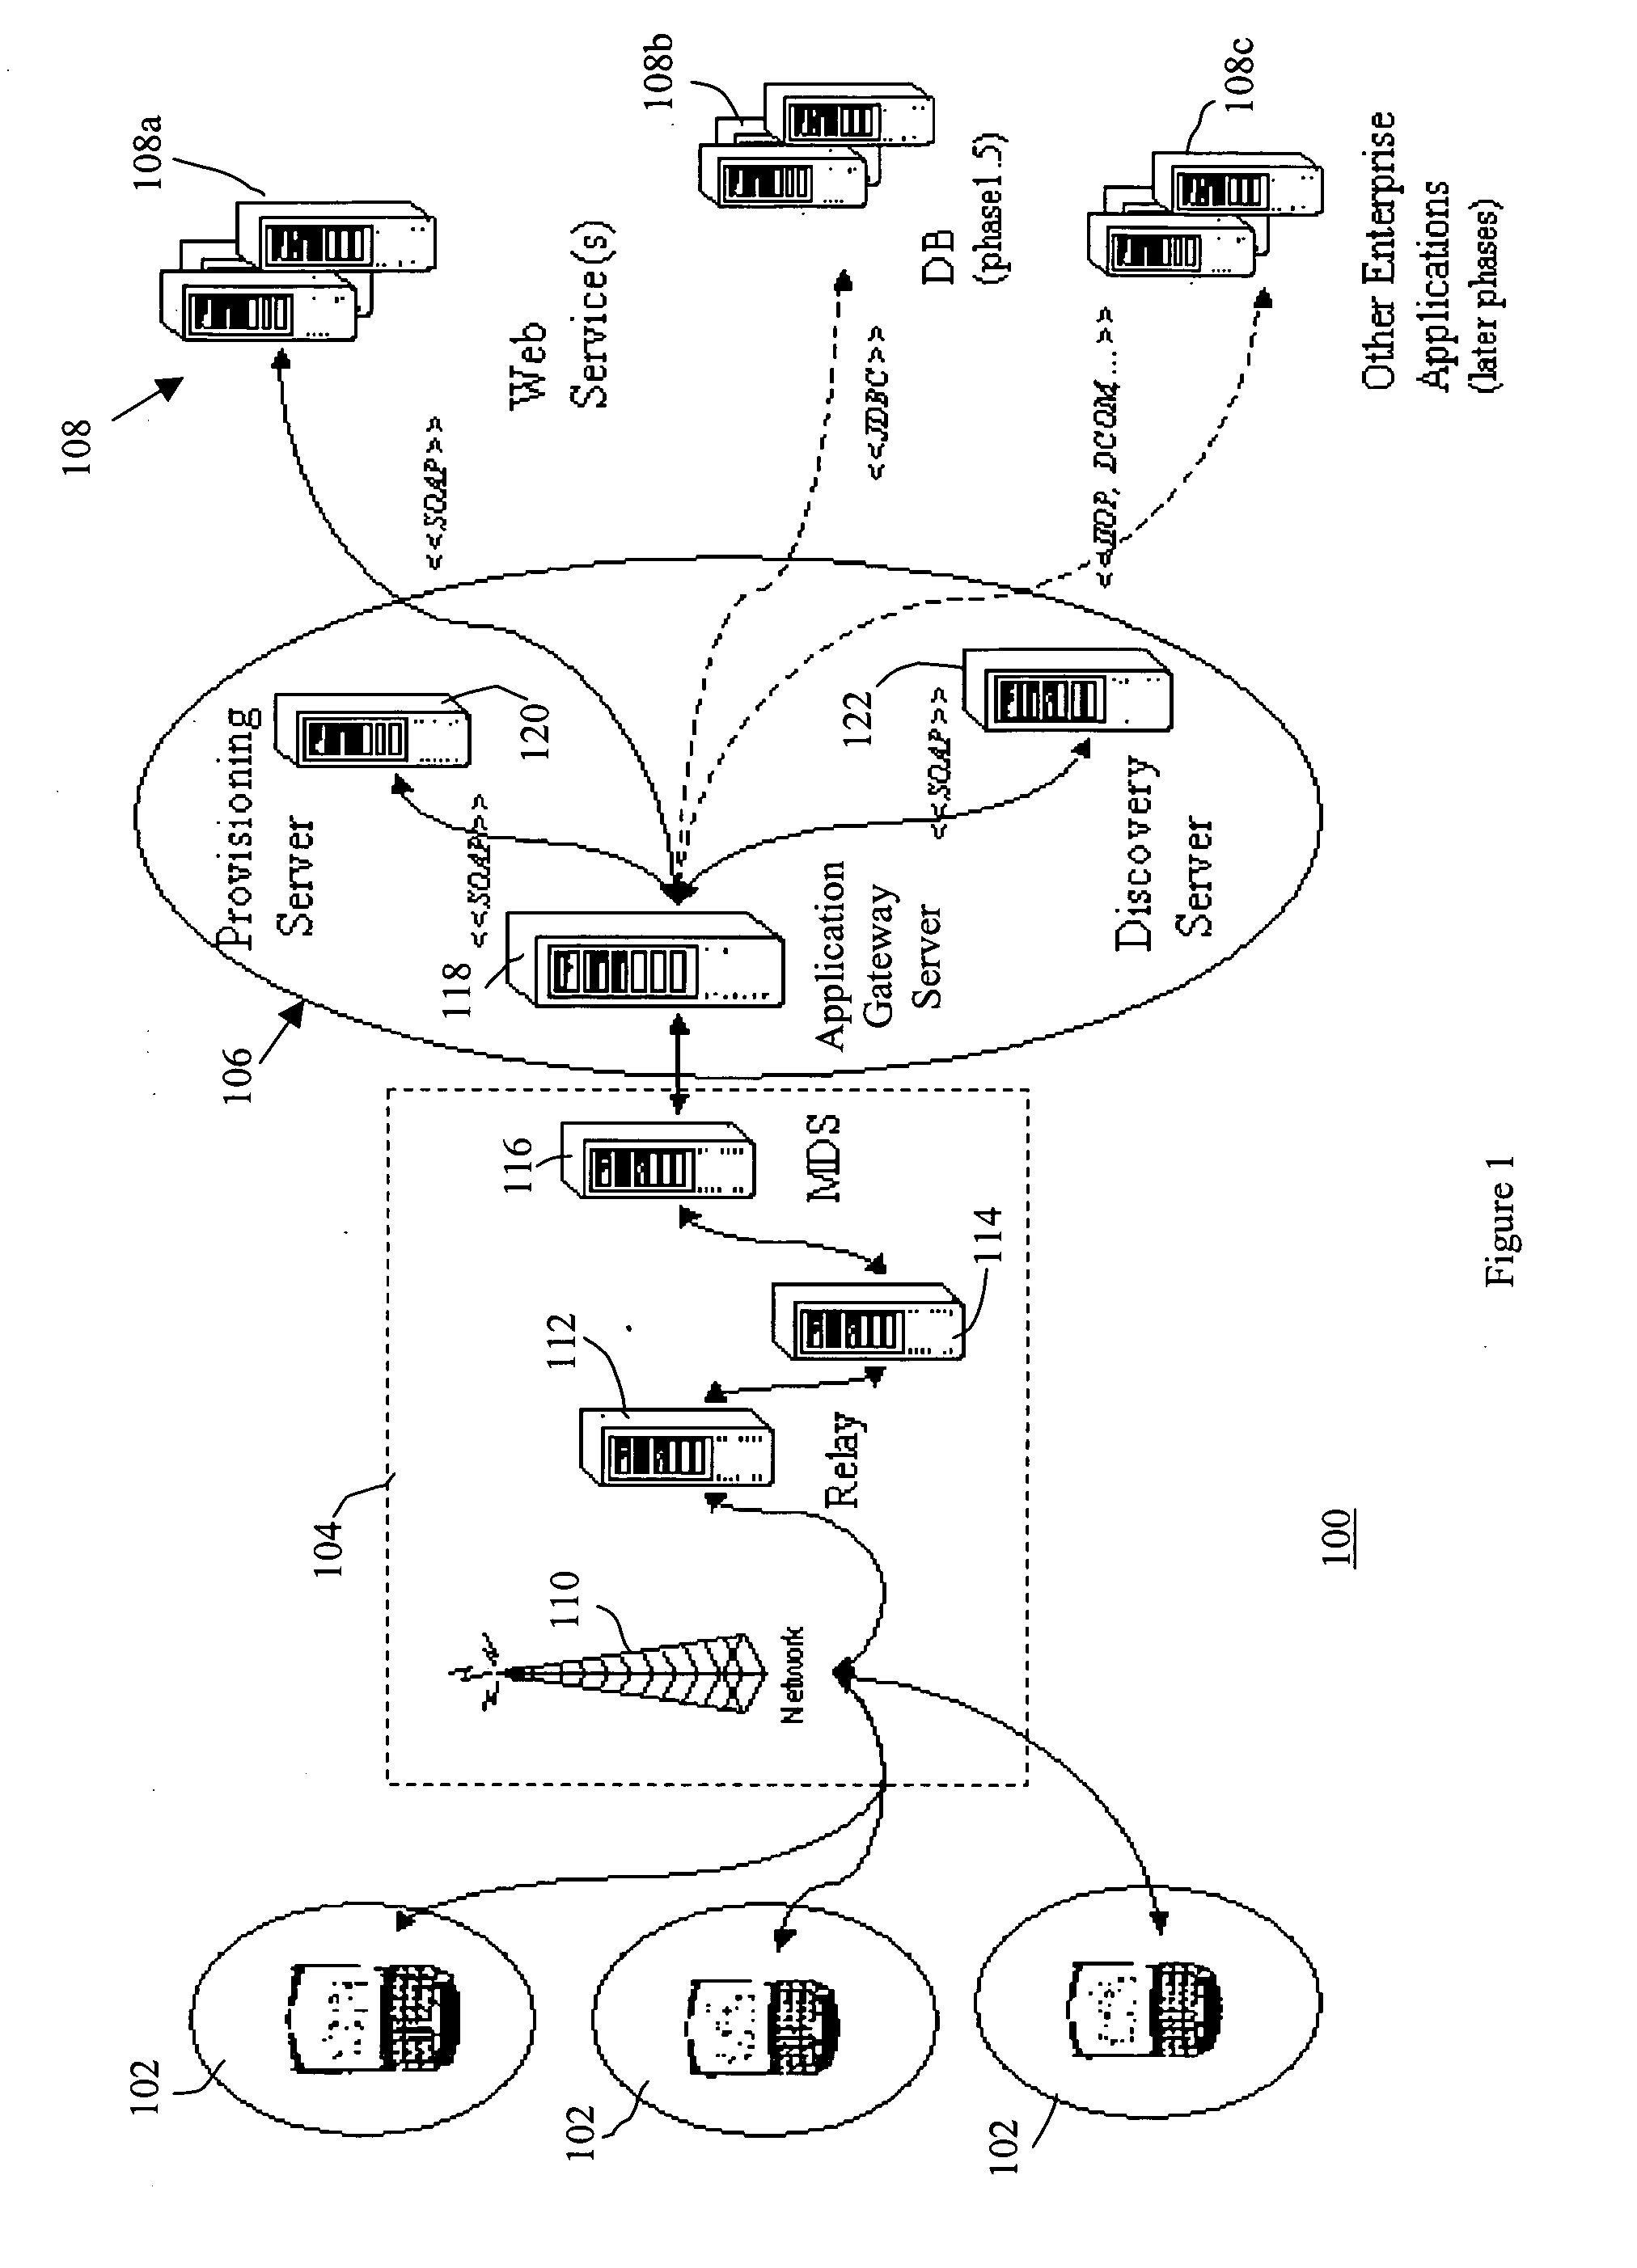 System and method for managing communication for component applications